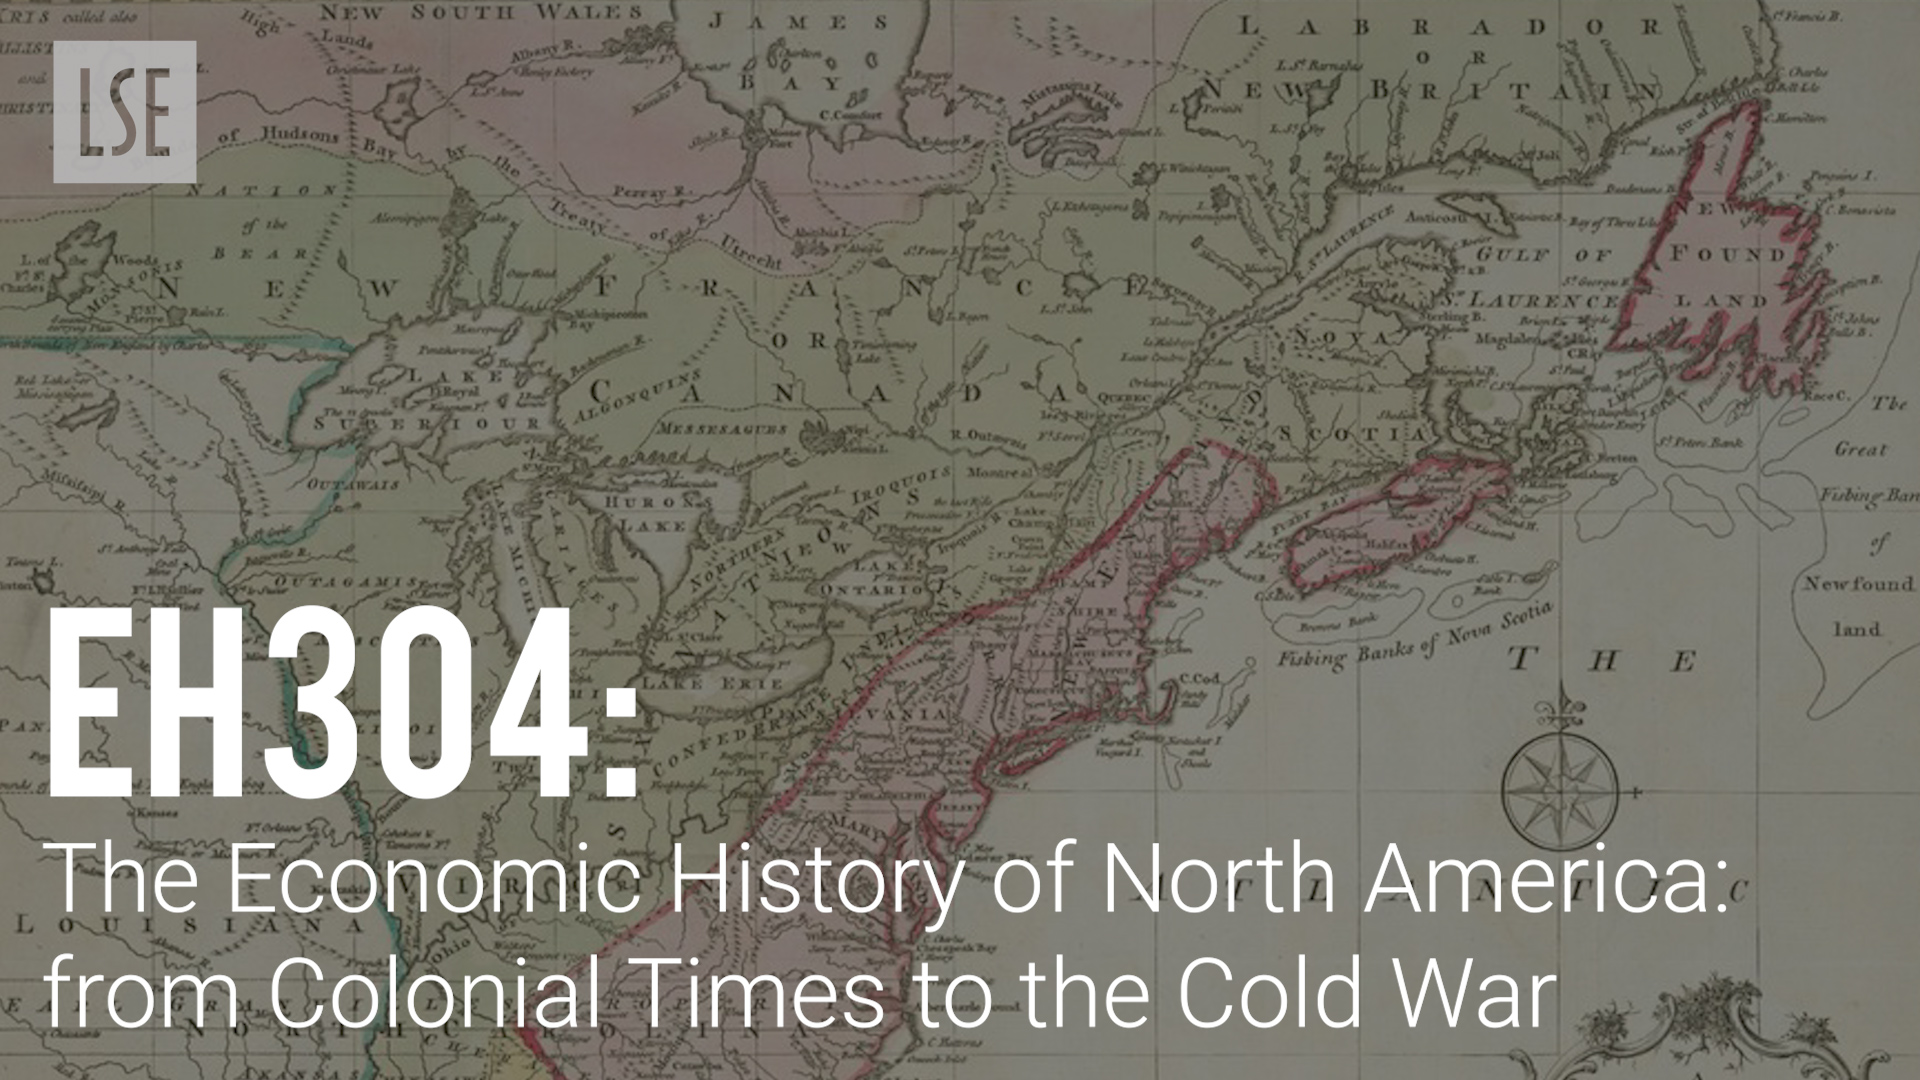 EH304 - The Economic History of North America: from Colonial Times to the Cold War, by Professor Chris Minns